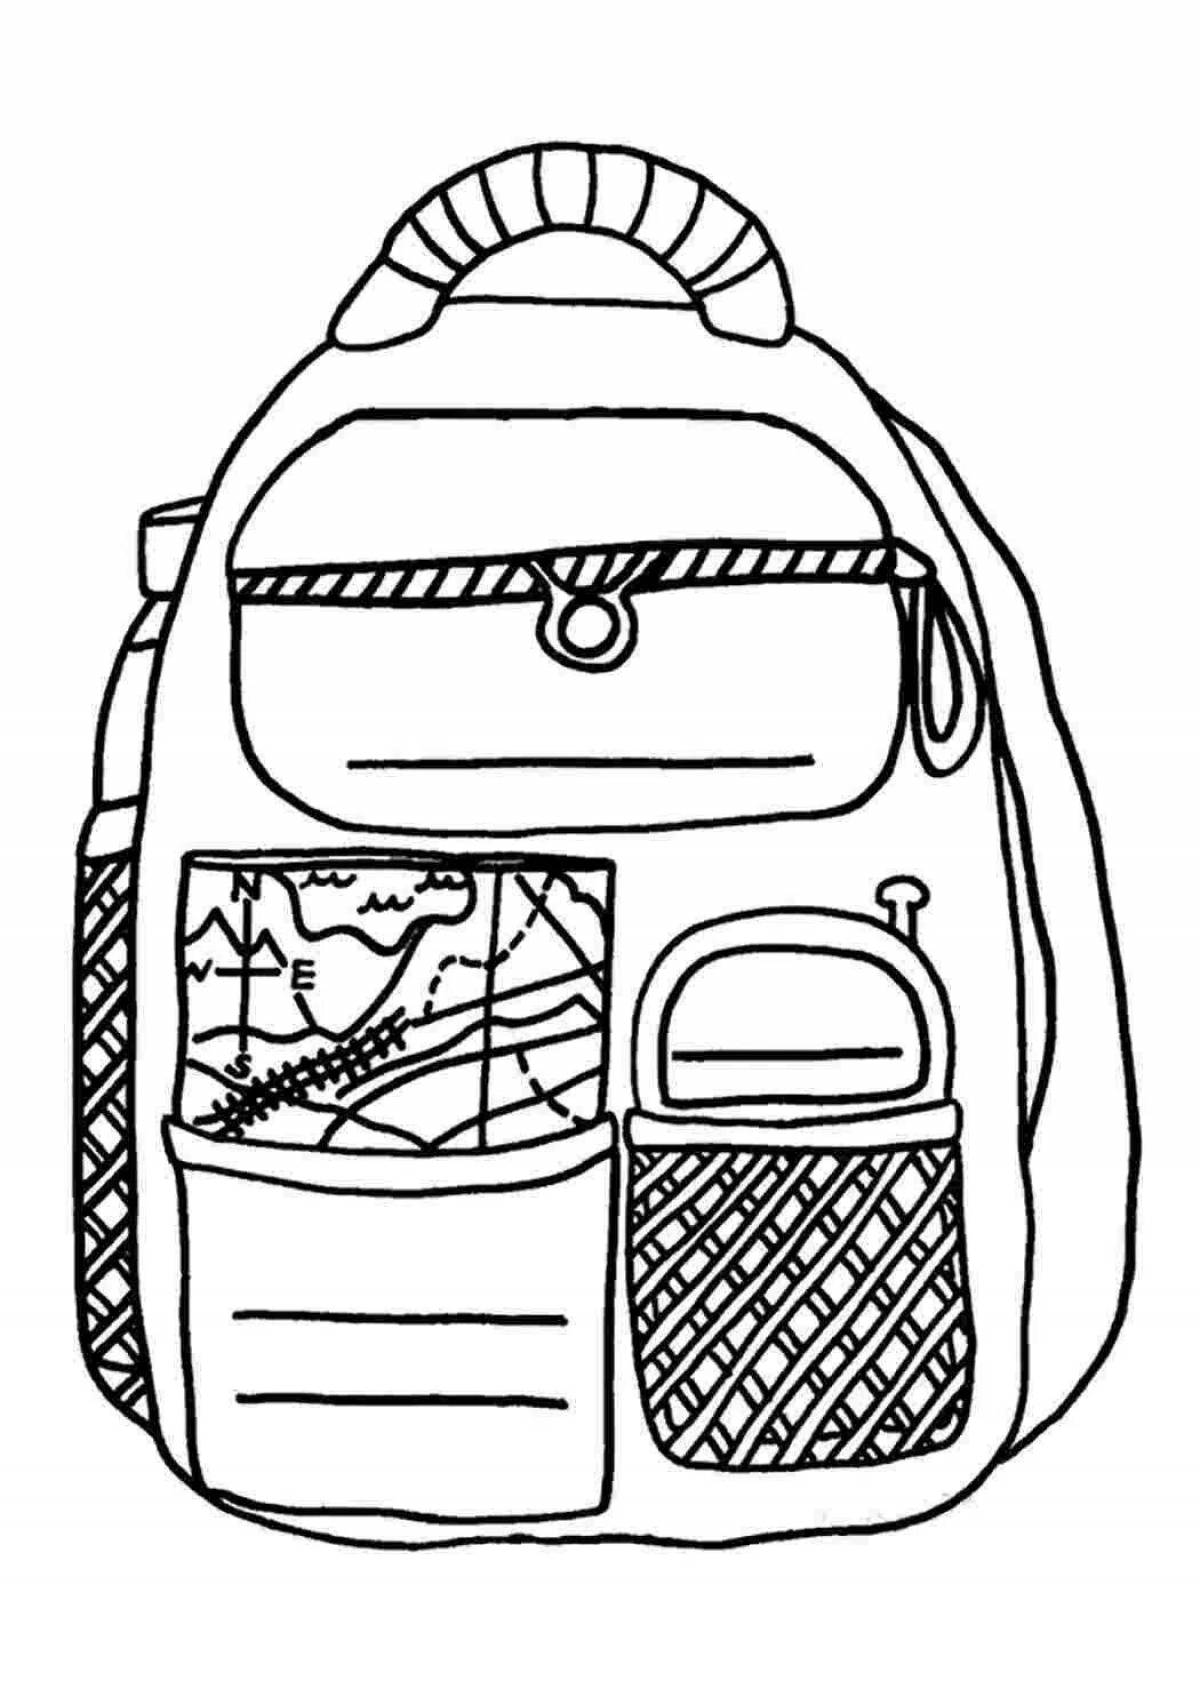 Coloring colorful backpack